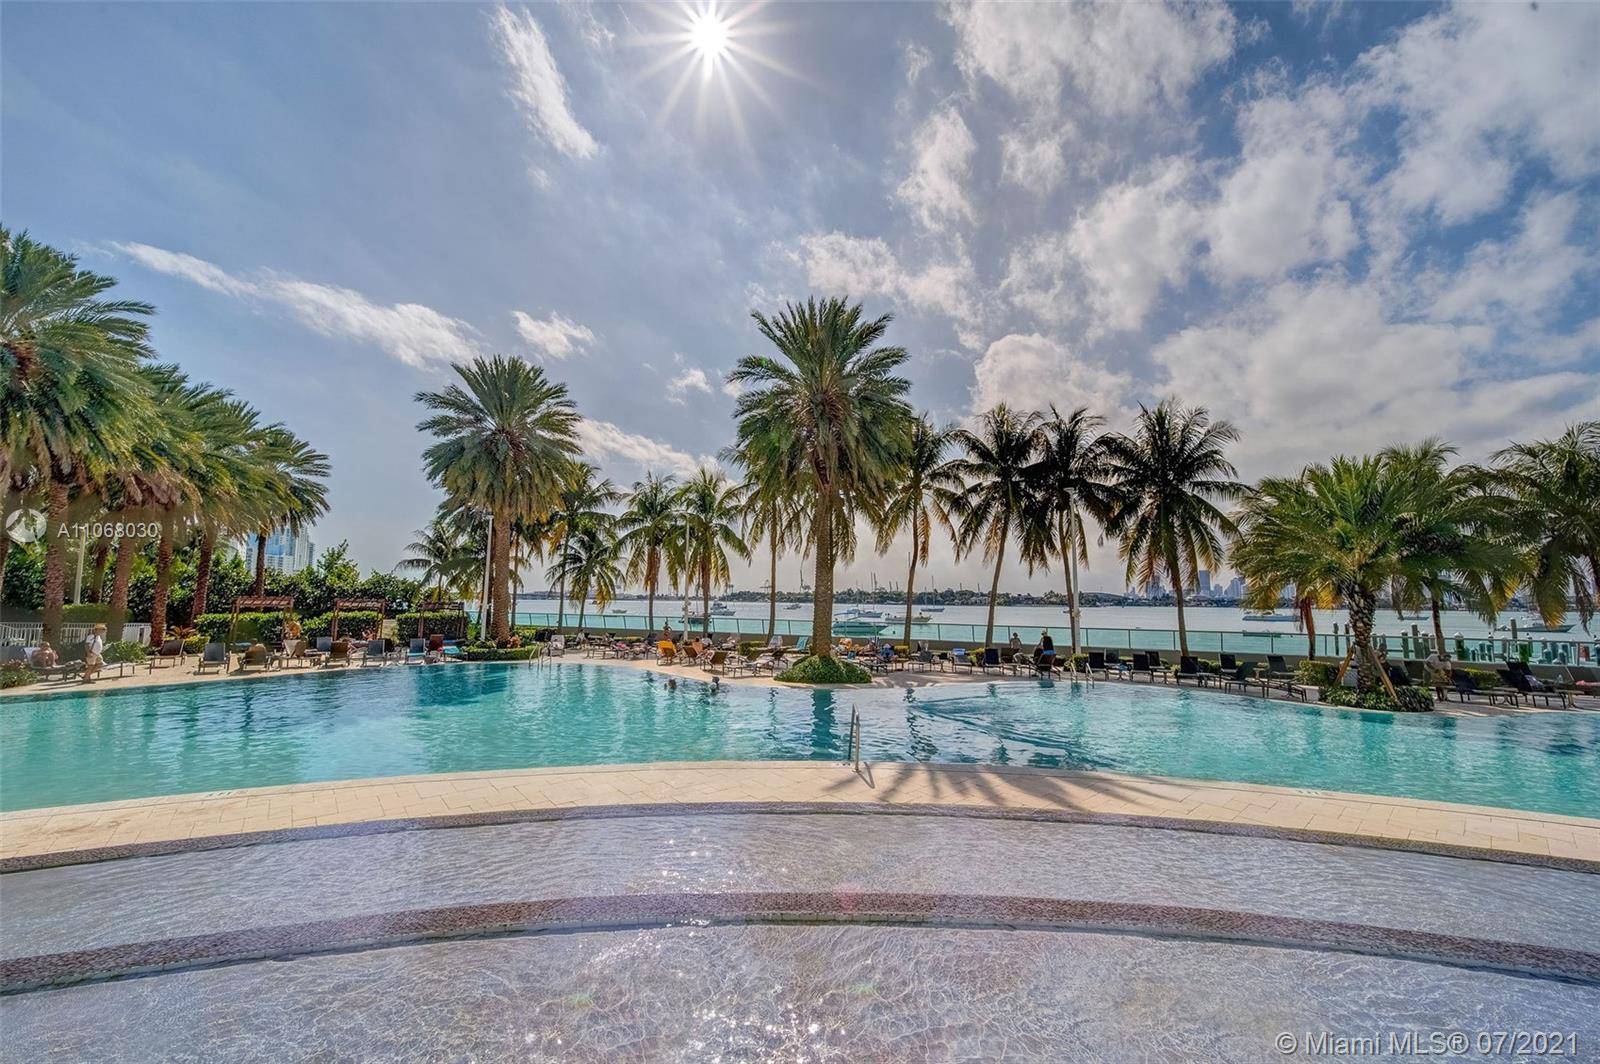 AVAILABLE 10 25. Welcome to Miami Beach's residential community, Flamingo Point.